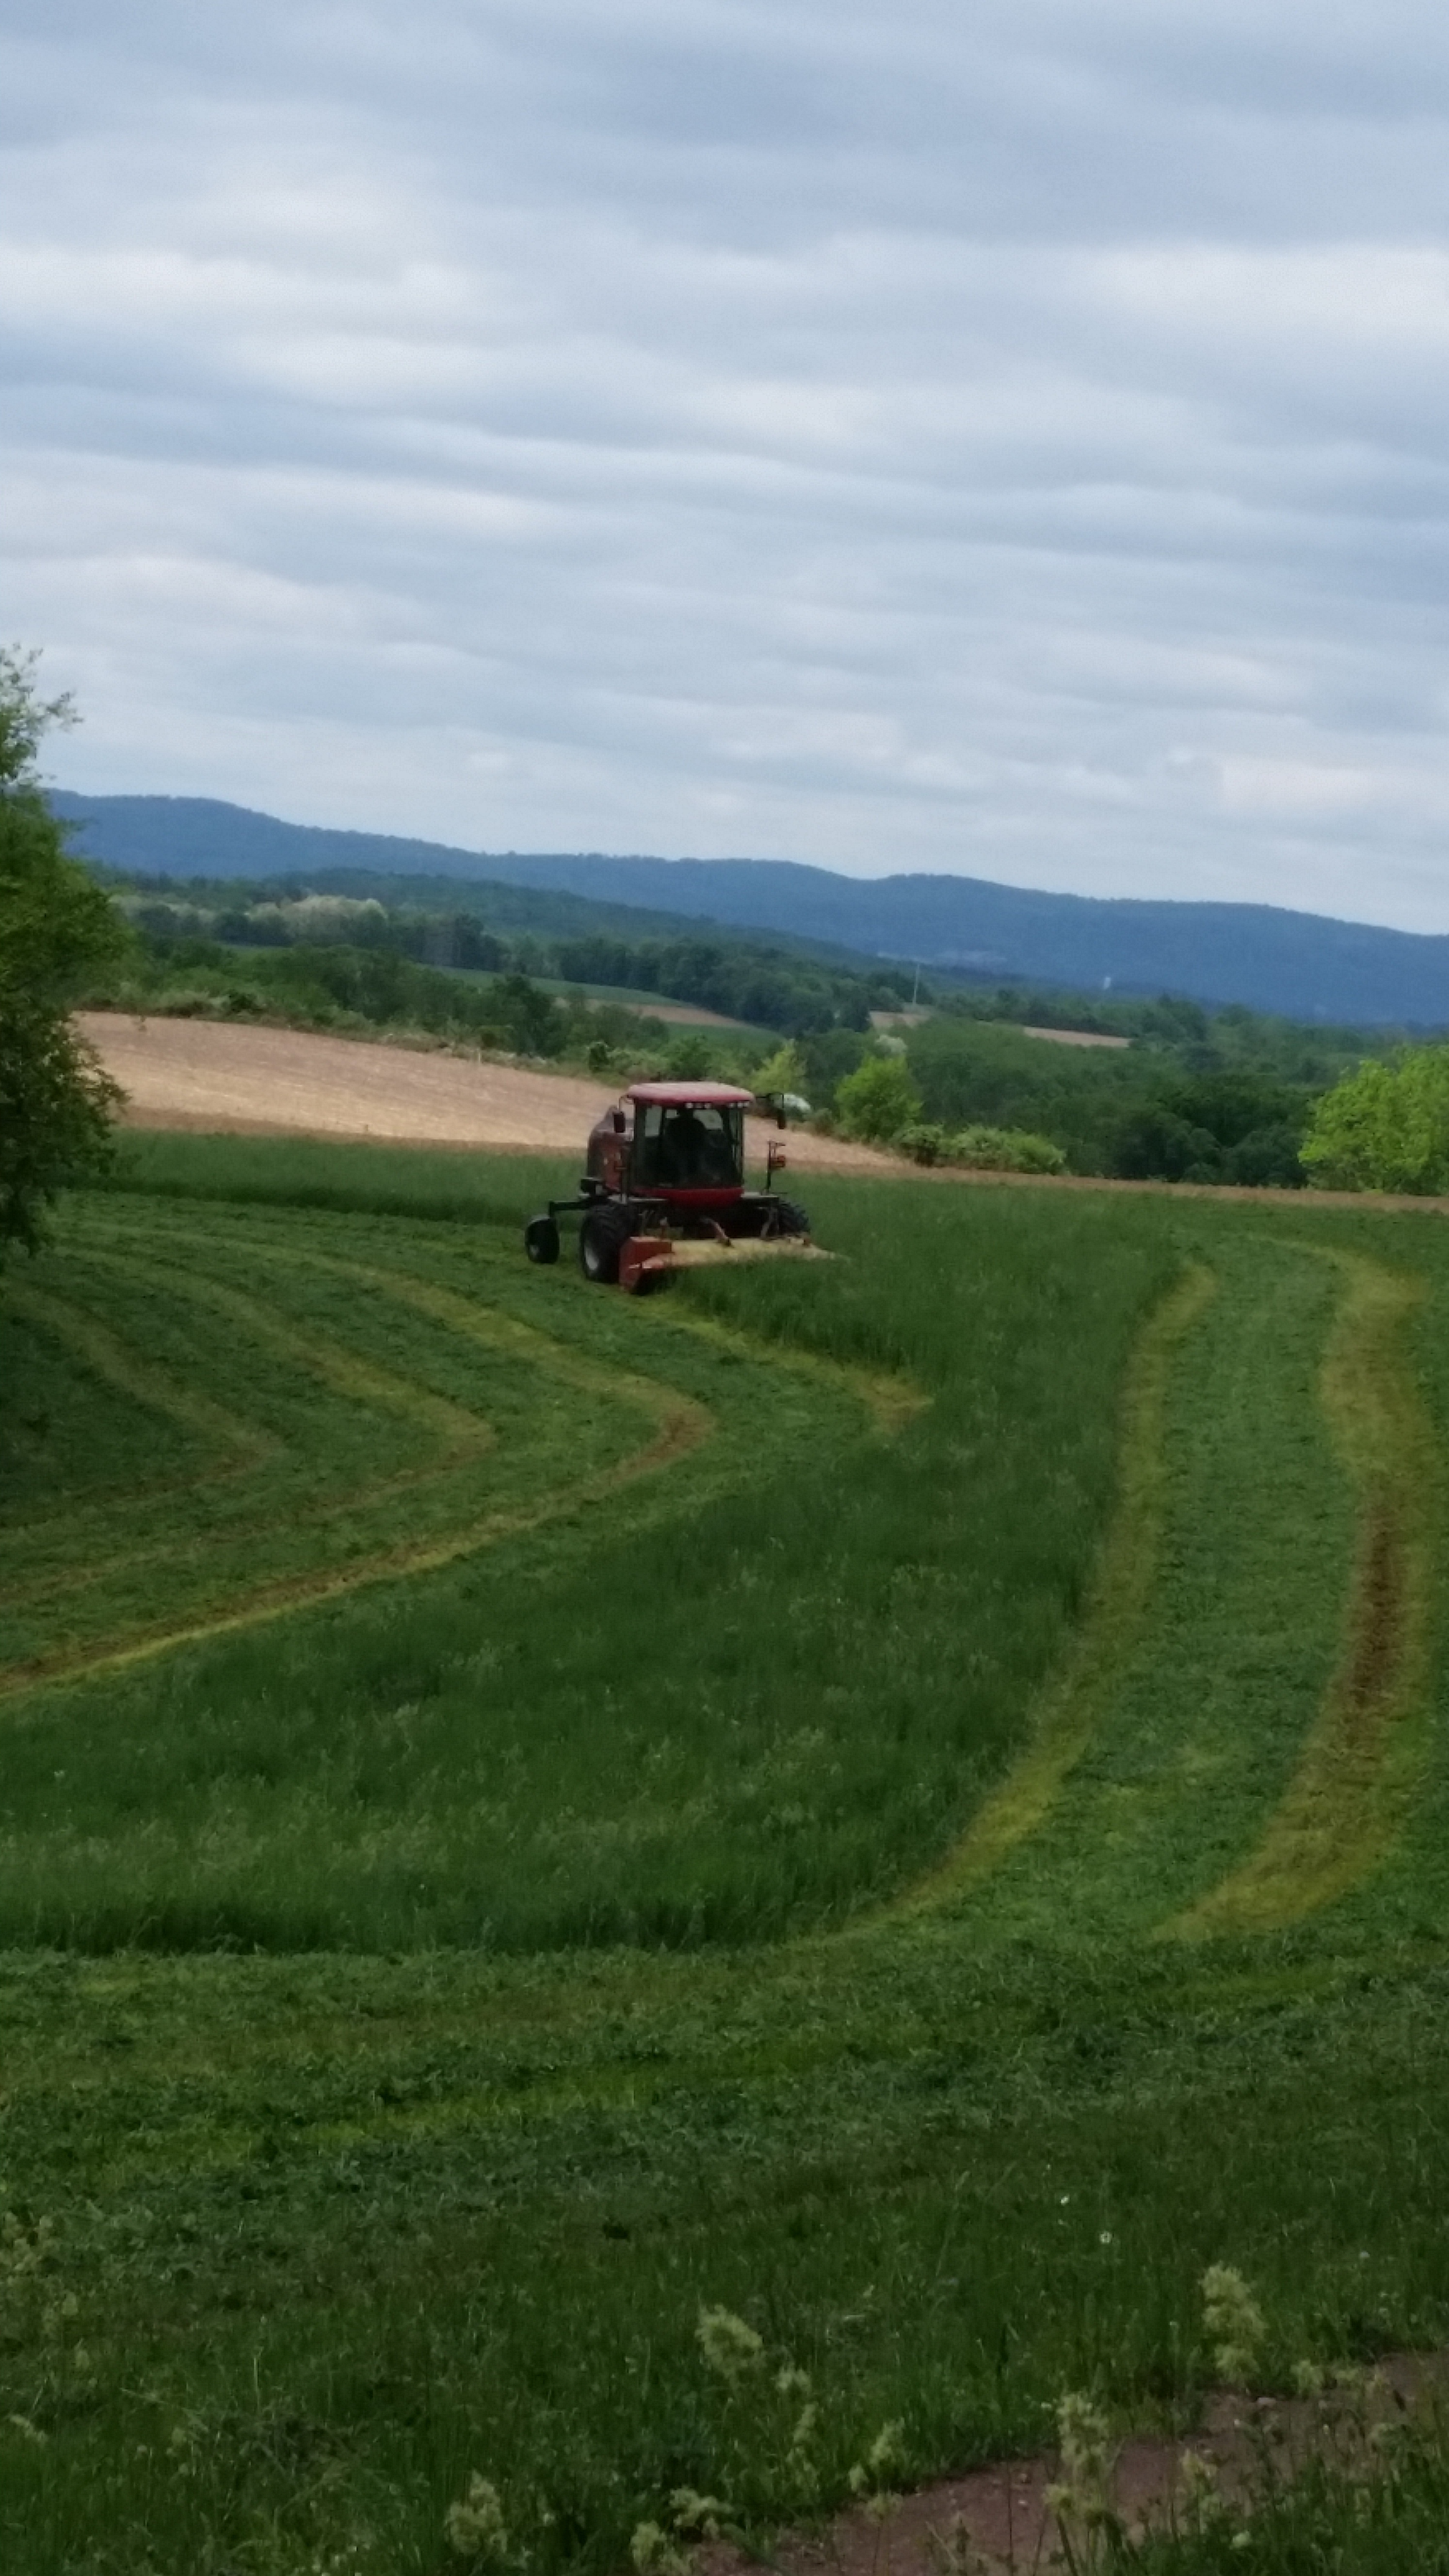 Tractor cutting hay